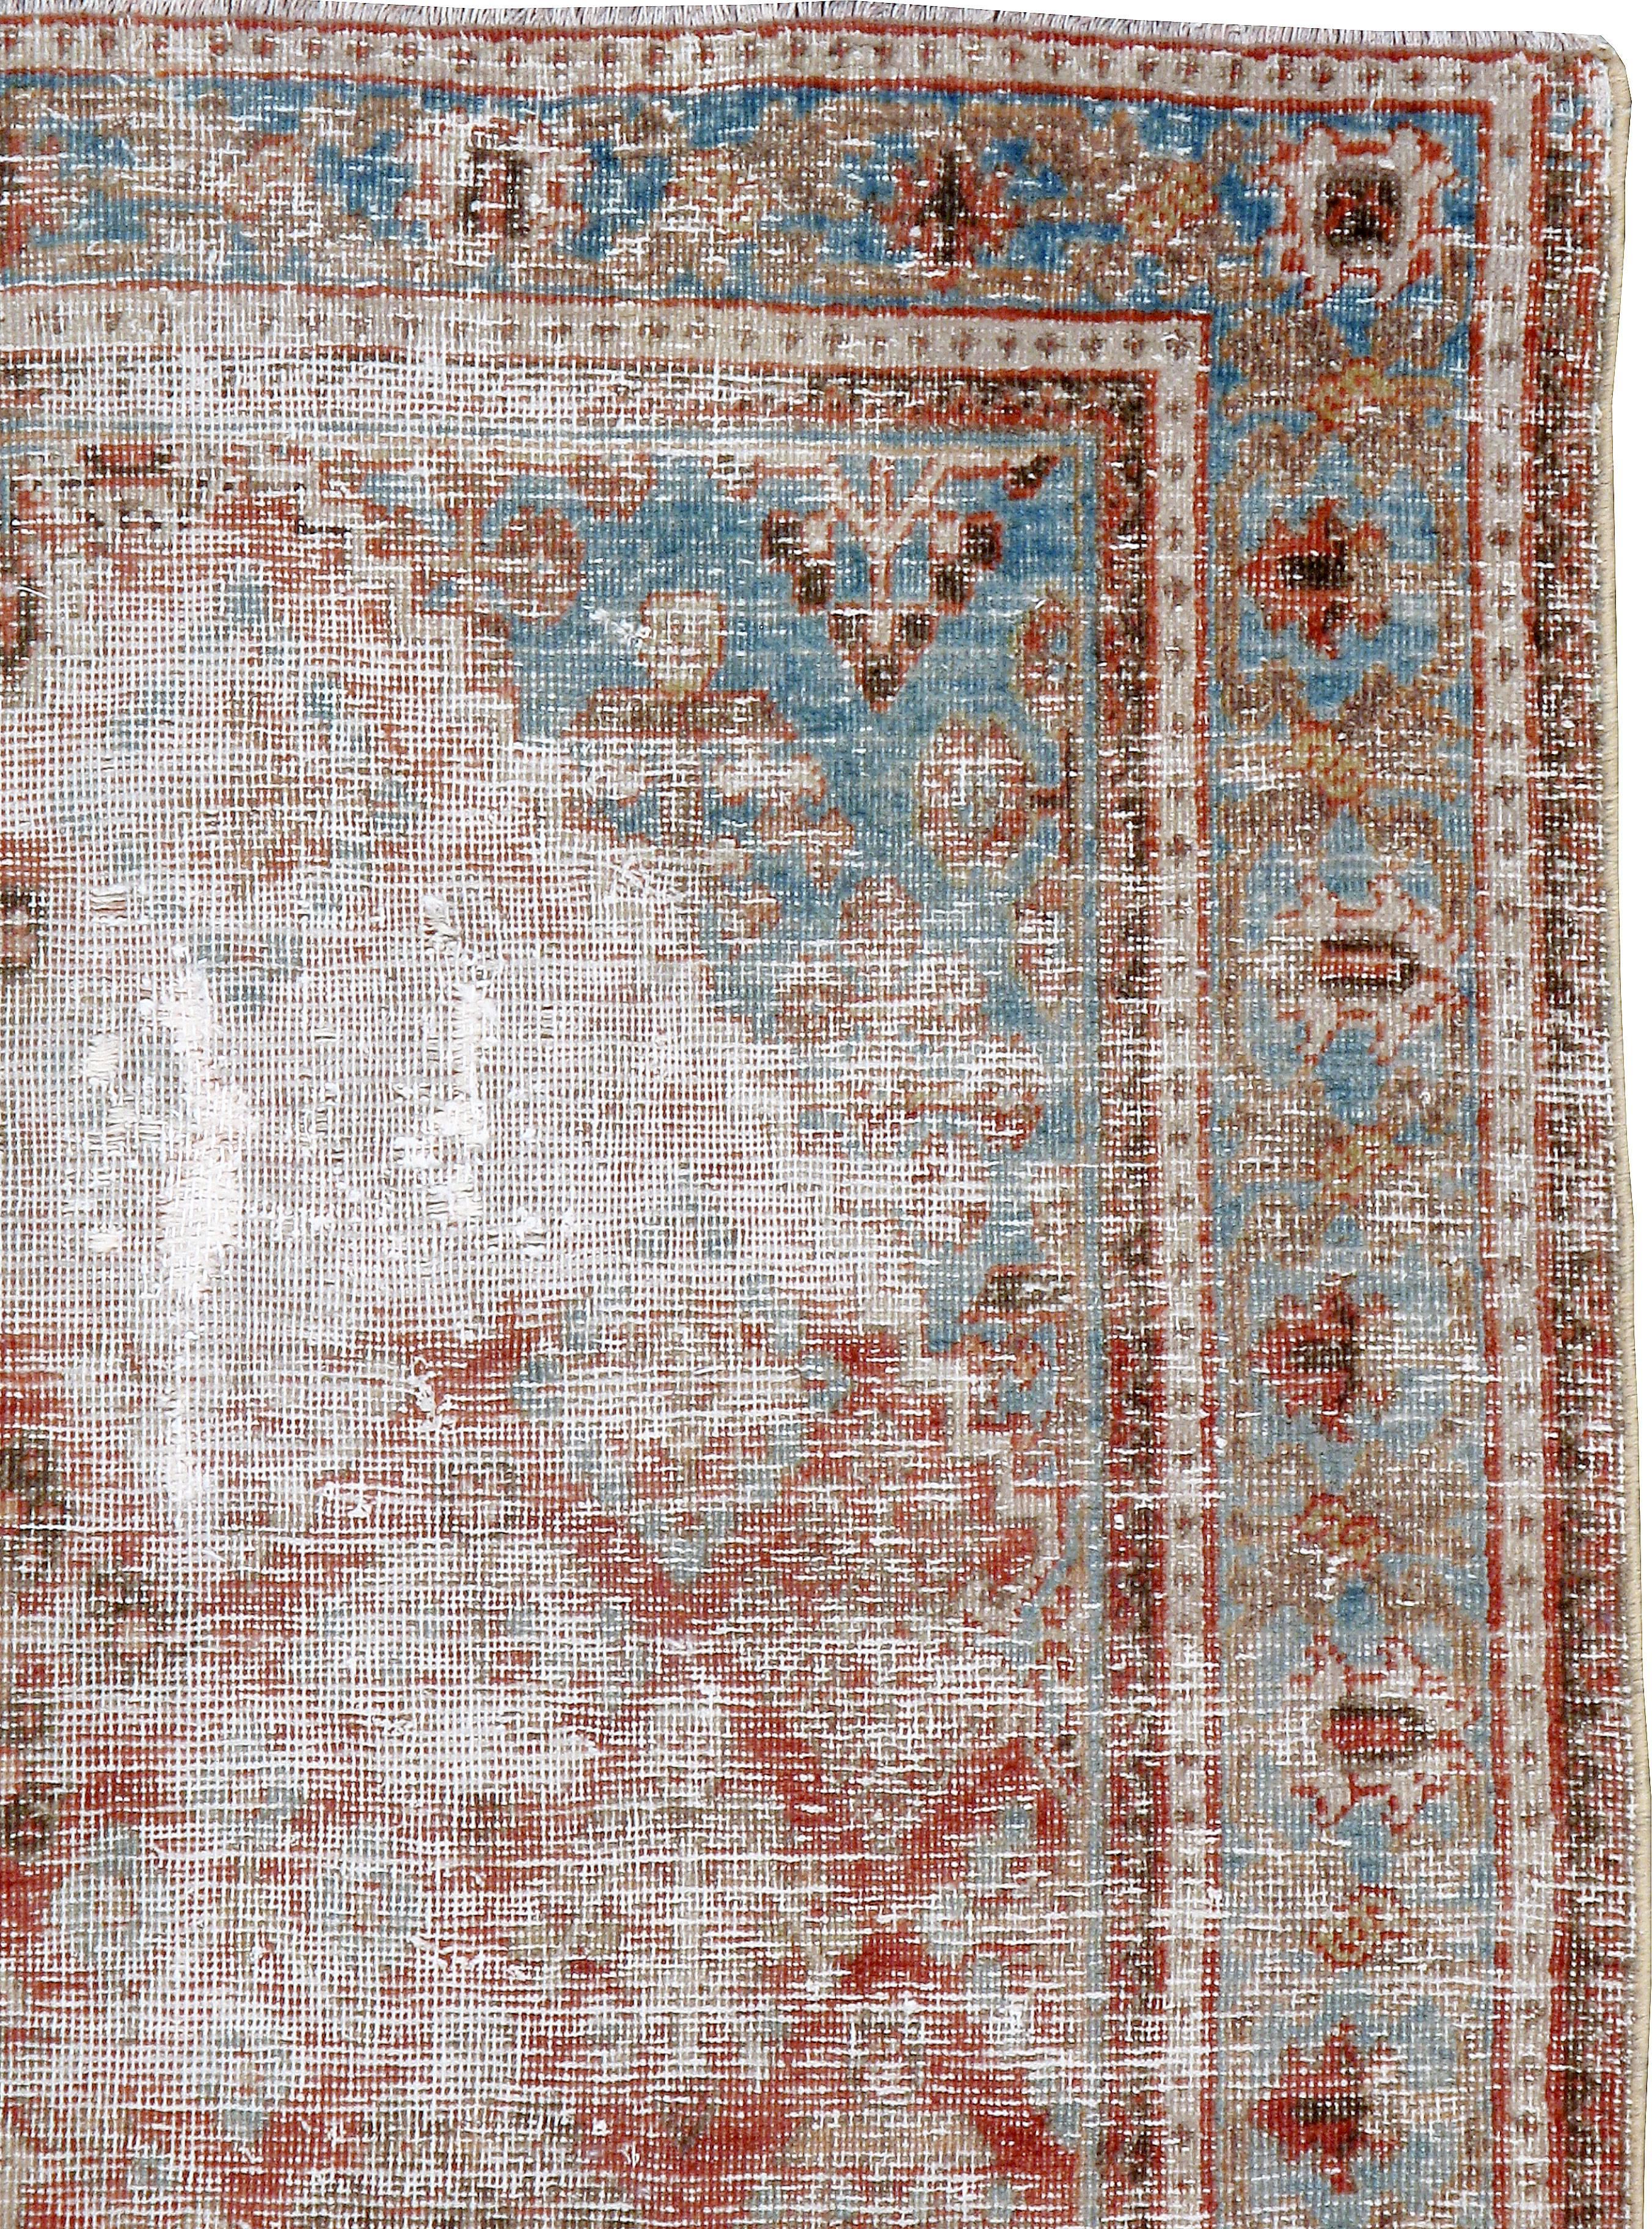 An antique Persian Joshegan carpet from the first quarter of the 20th century.